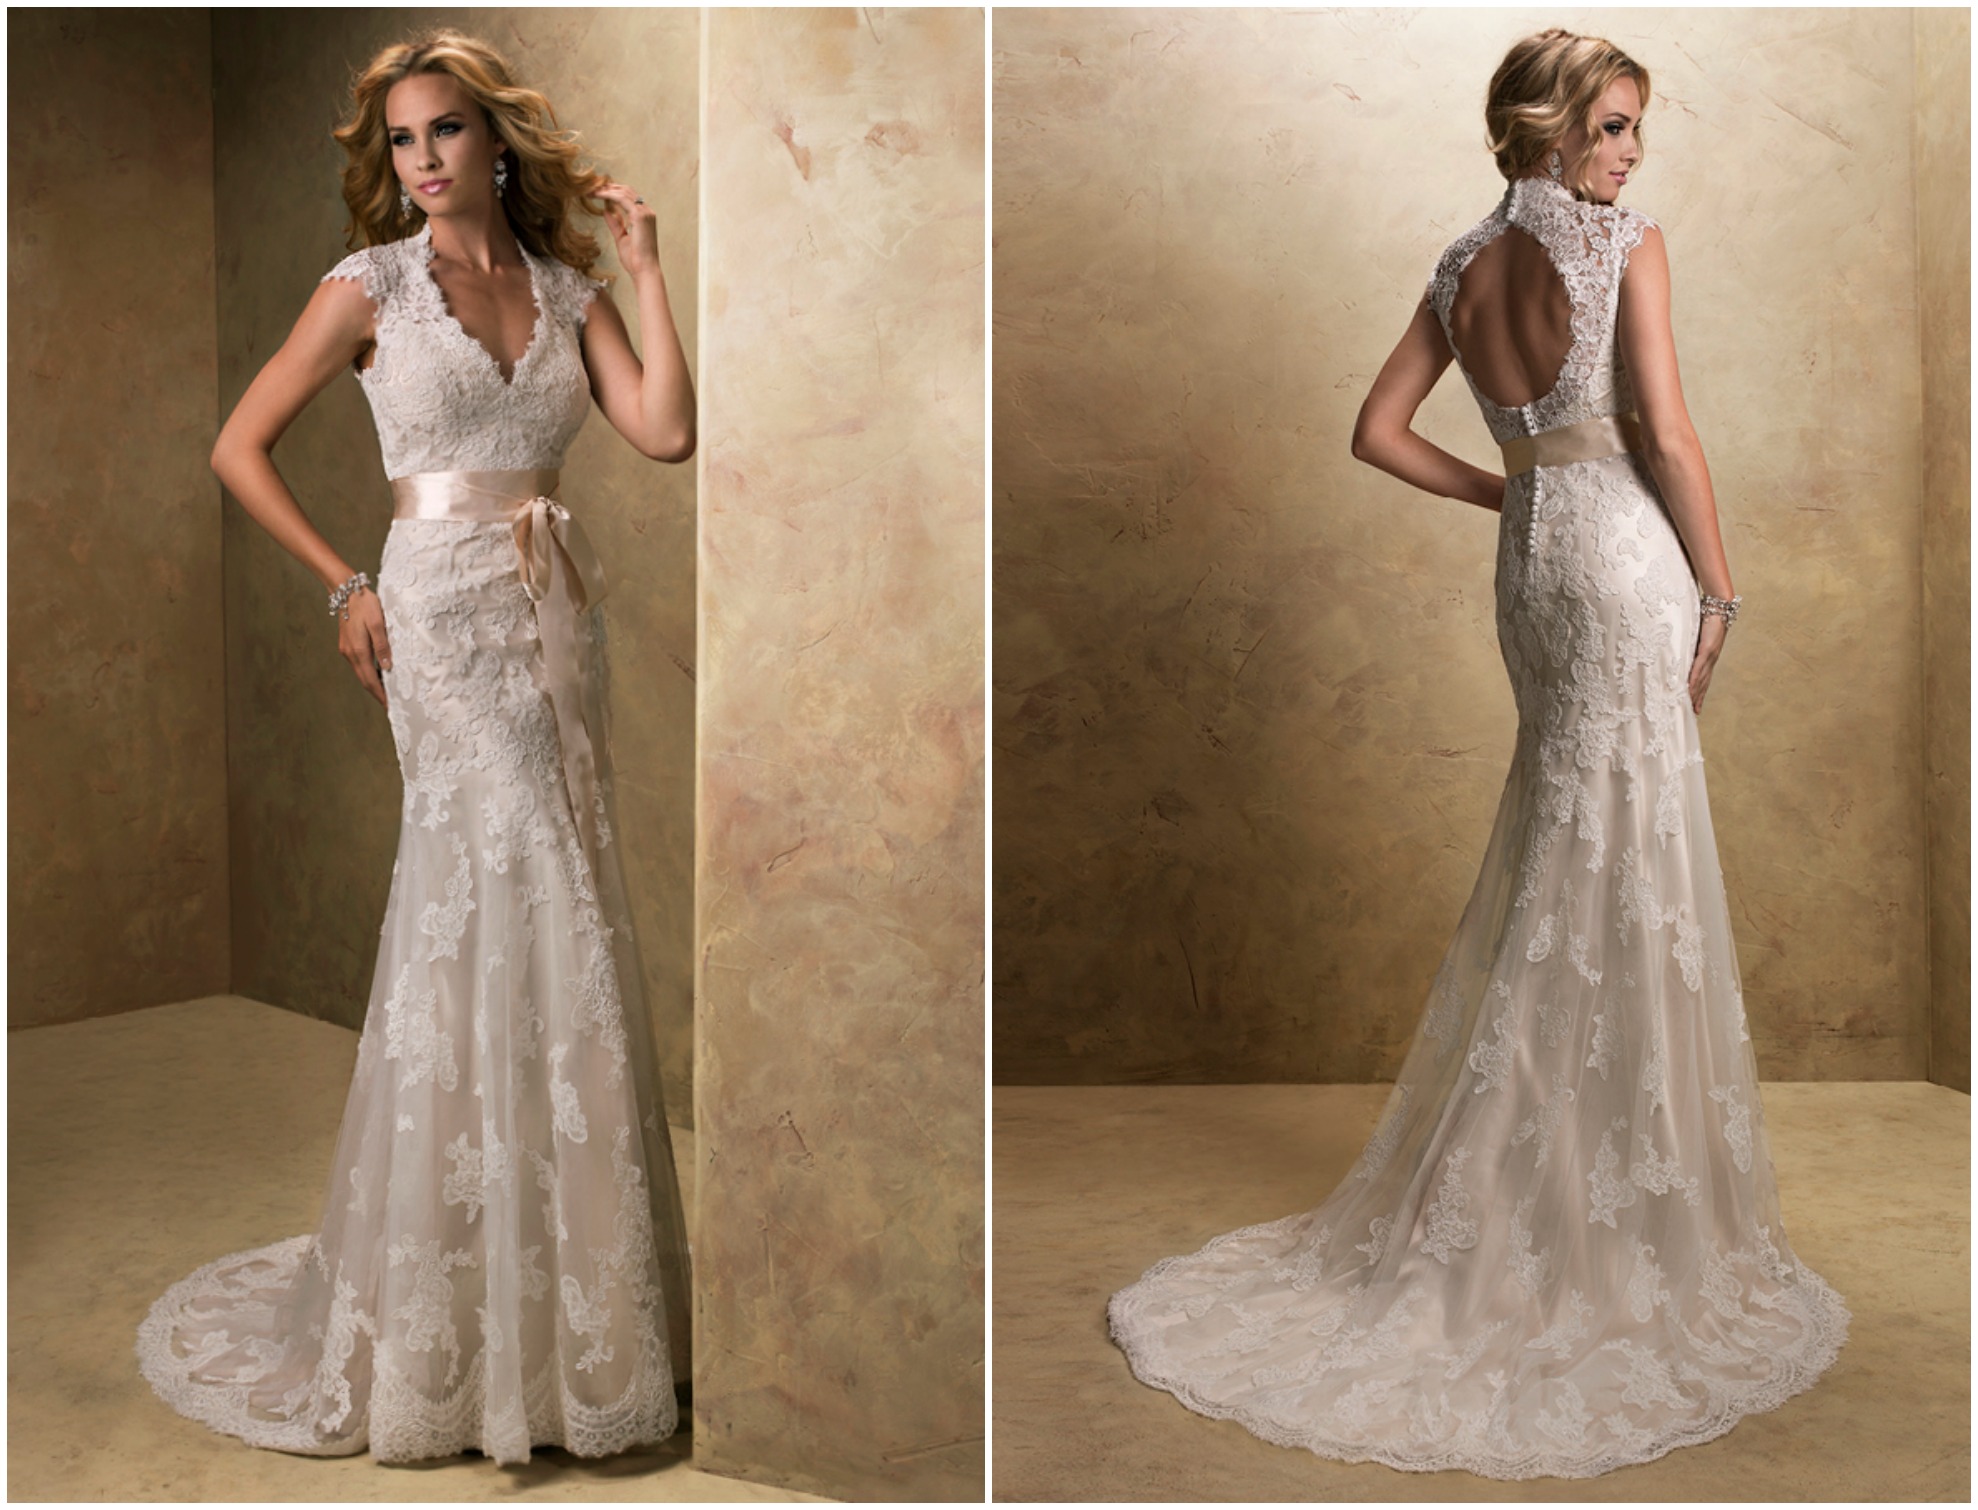 <a href="http://www.maggiesottero.com/dress.aspx?style=12623" target="_blank">Maggie Sottero</a>